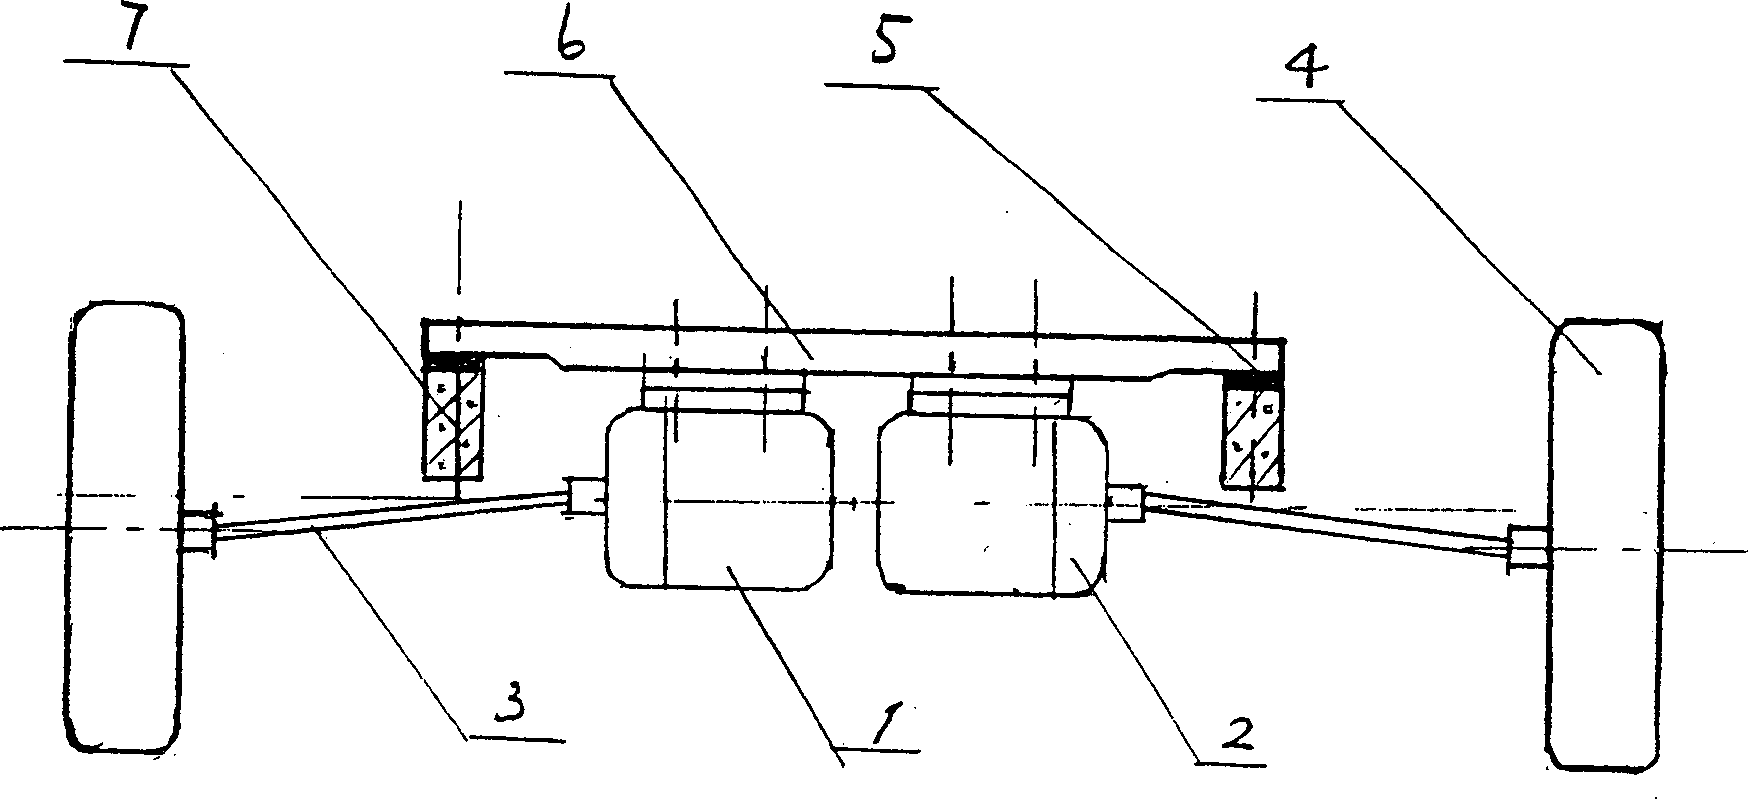 Structure mode of electro-mobile power and driving device